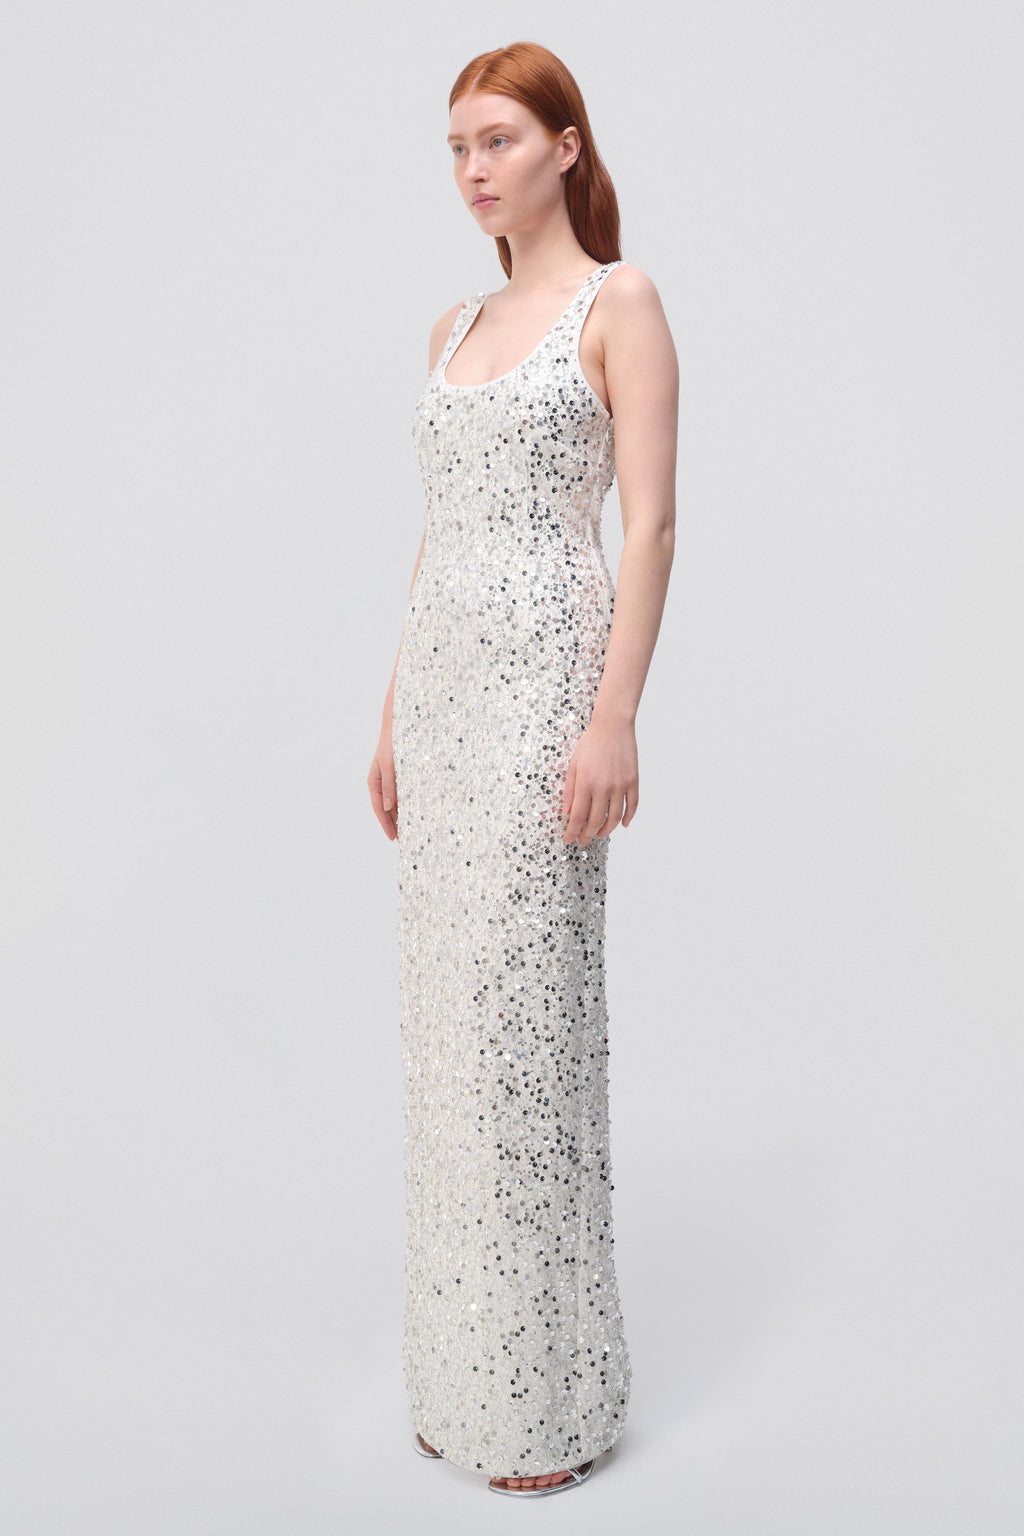 Dione Gown